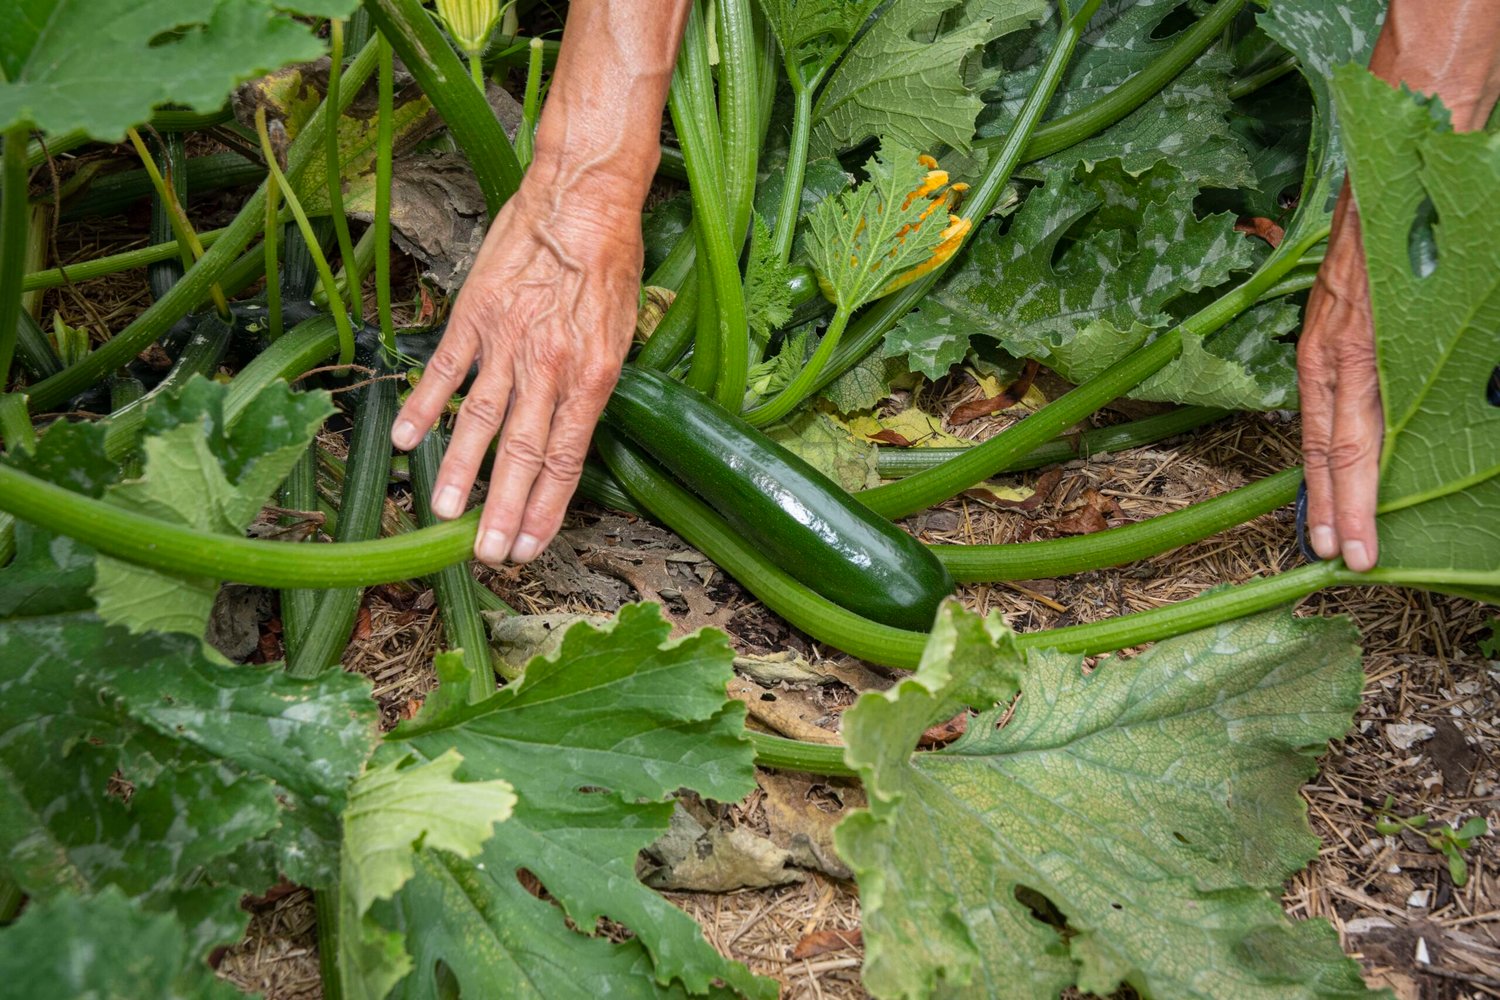 To keep vegetable gardens healthy during a drought, mulching helps lock in moisture.